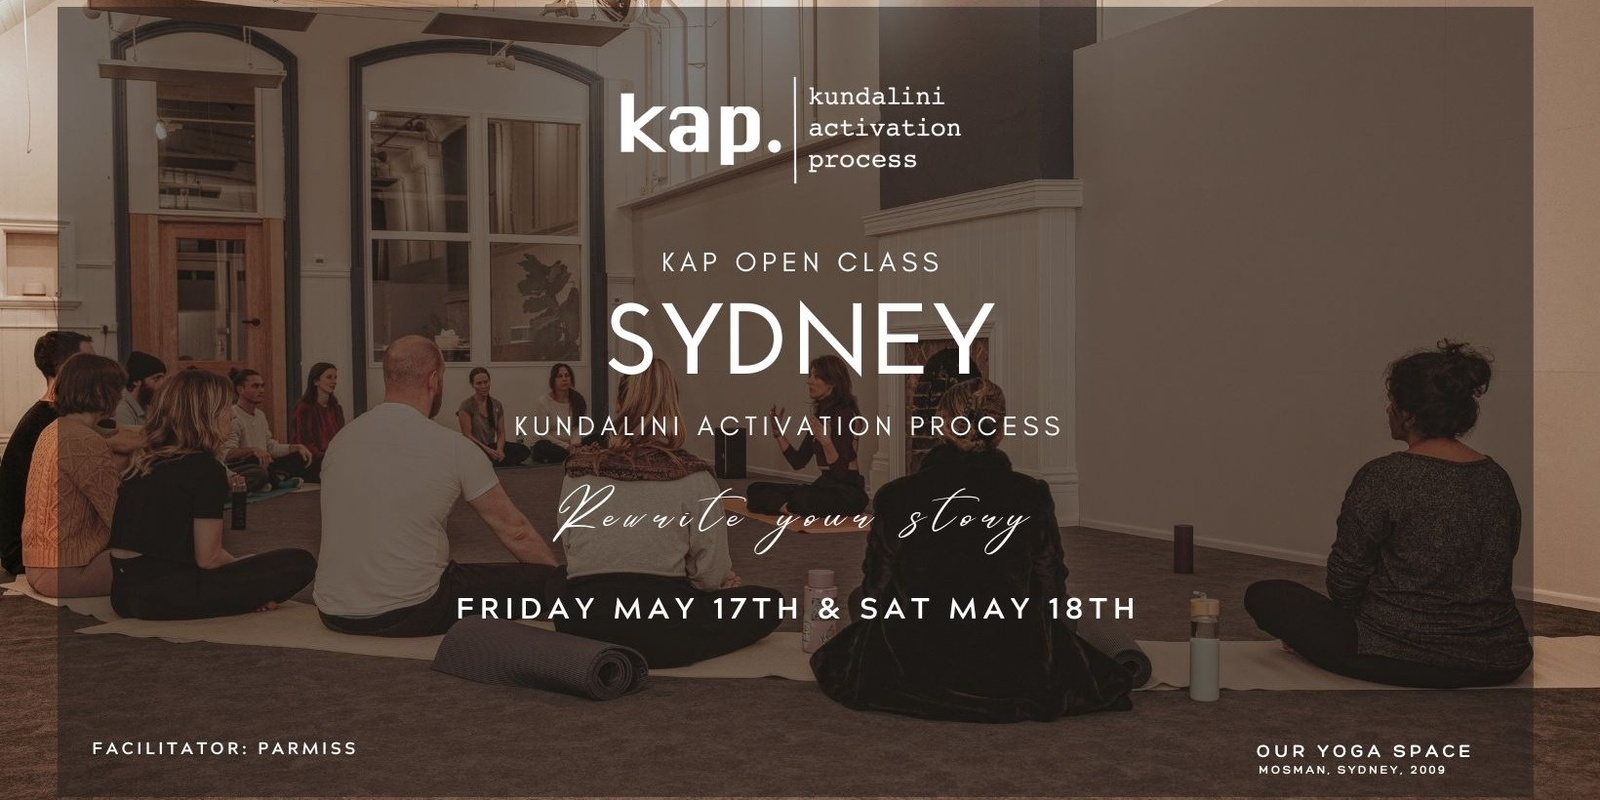 Banner image for KAP Open Class in Sydney - Kundalini Activation Process 